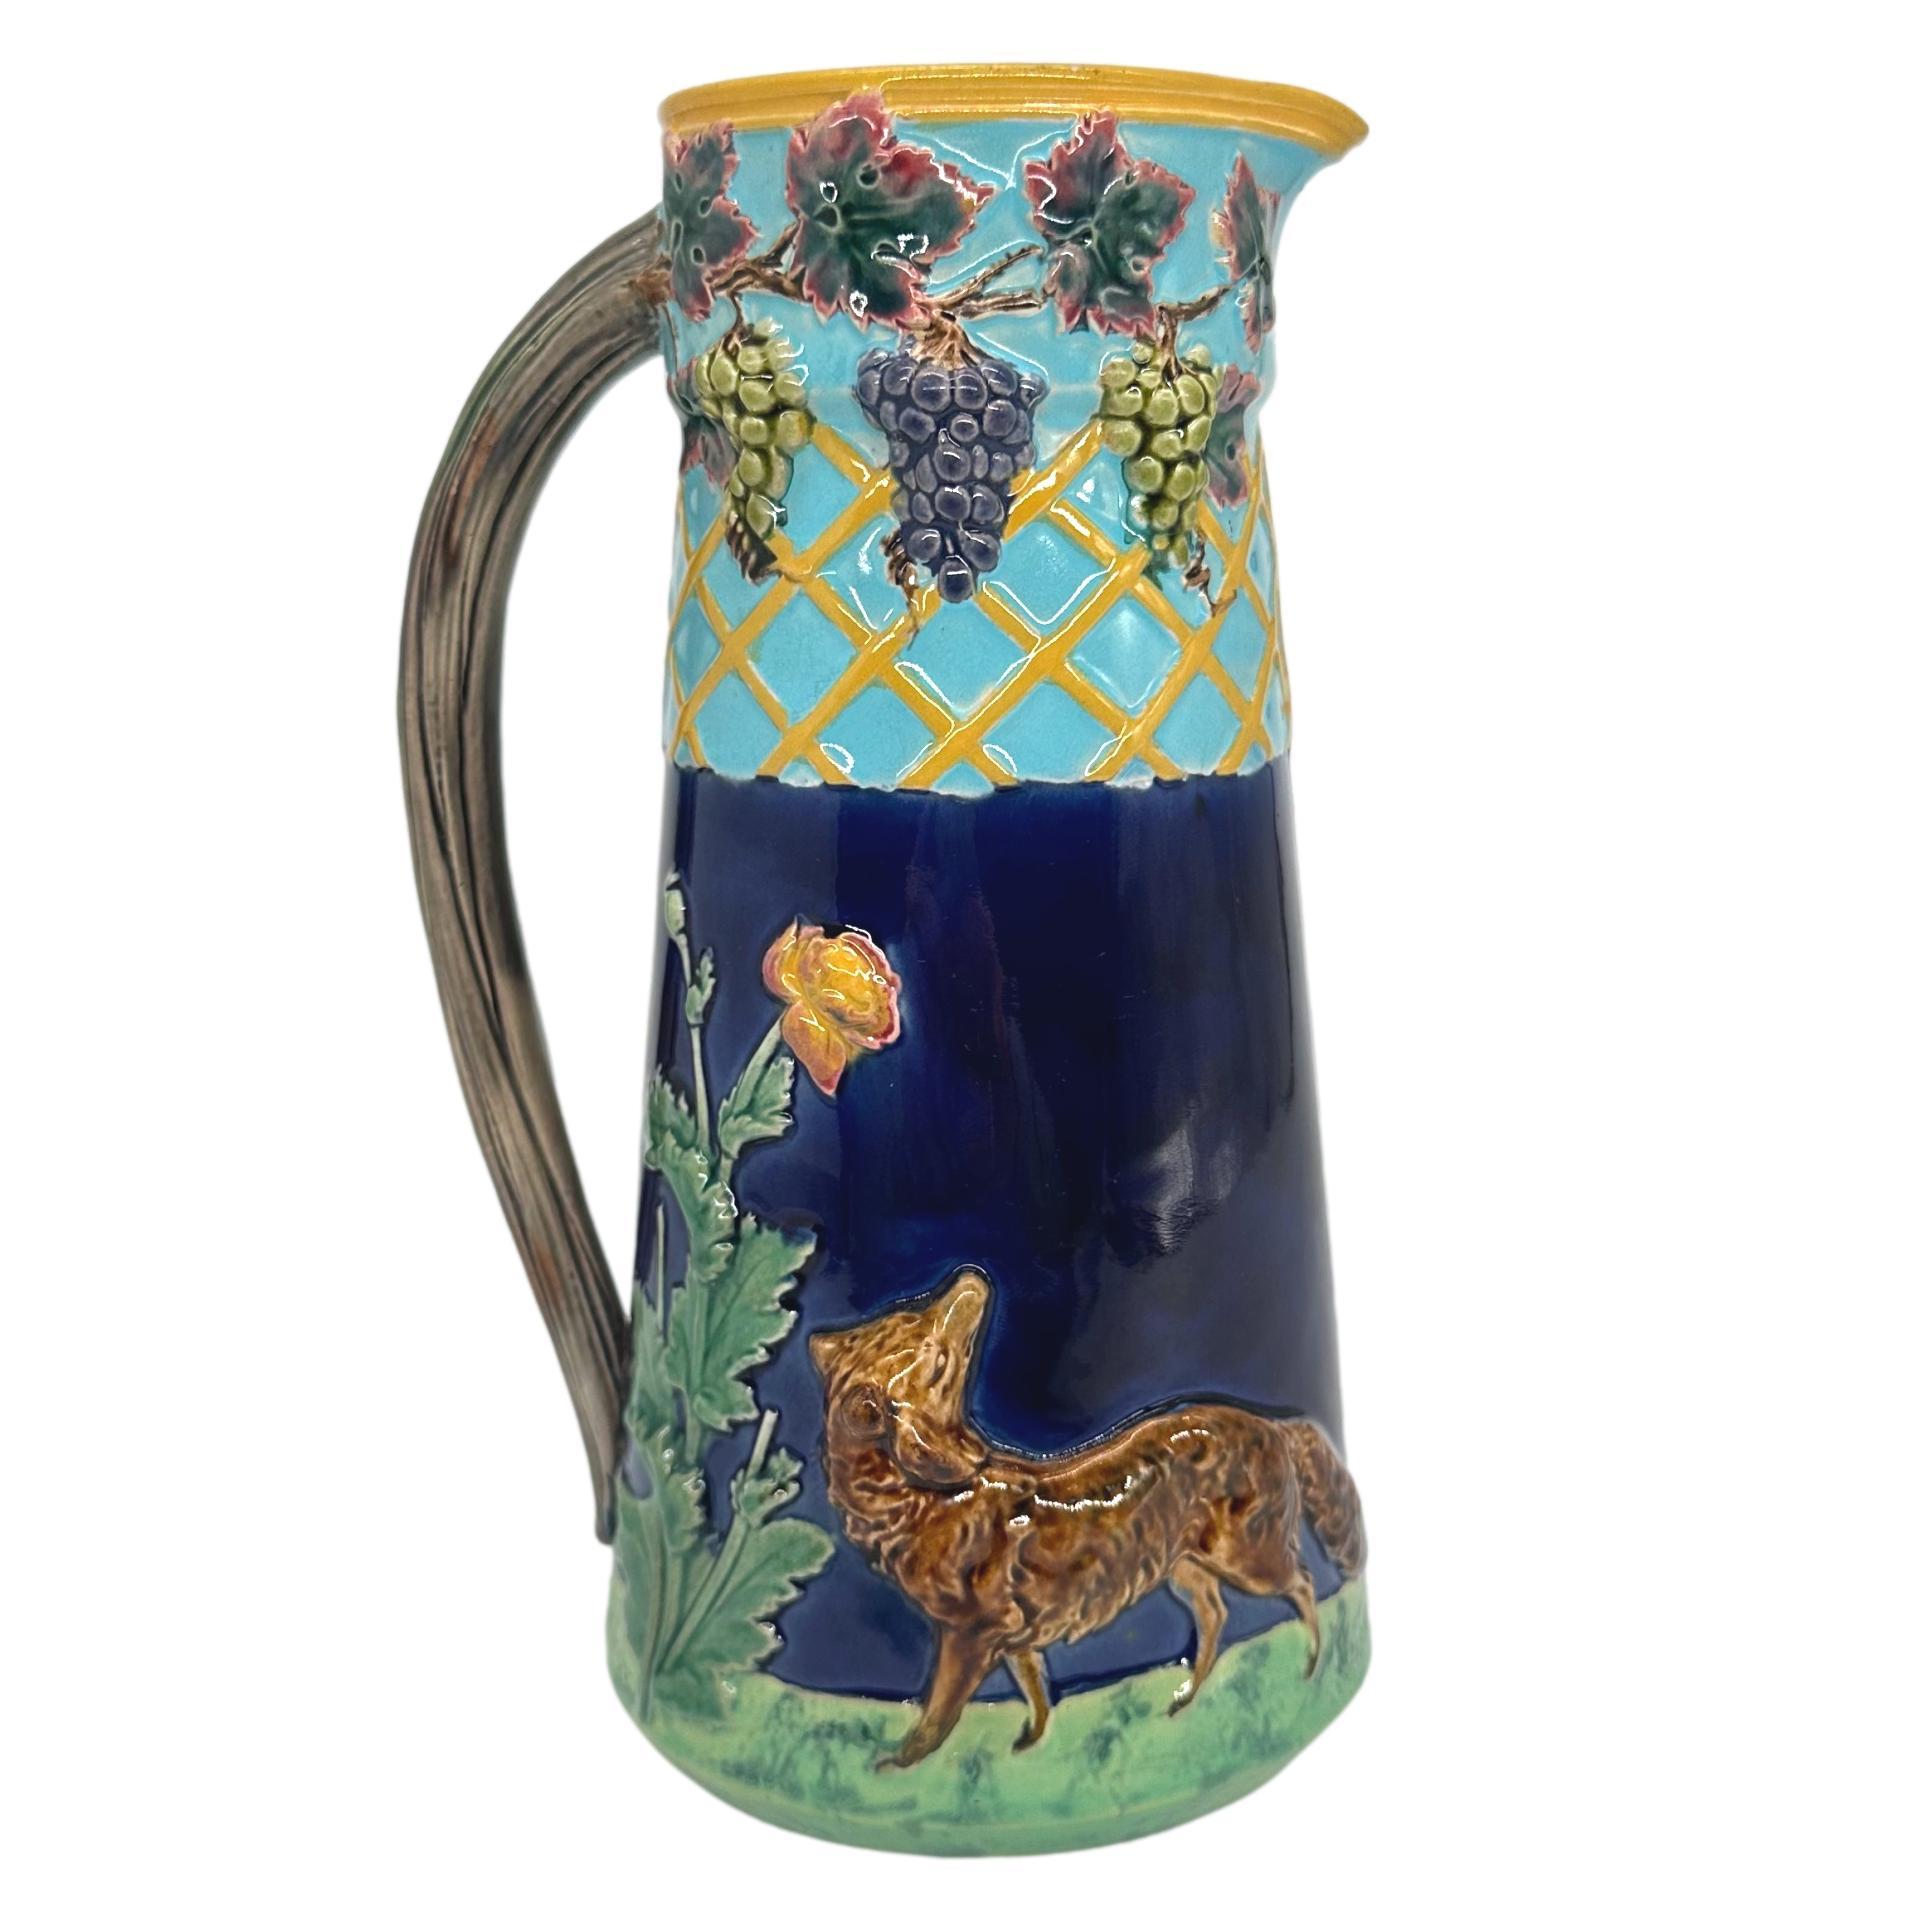 English A BWM Majolica Jug Depicting 'The Fox and the Grapers' Aesop's Fable, ca. 1876 For Sale